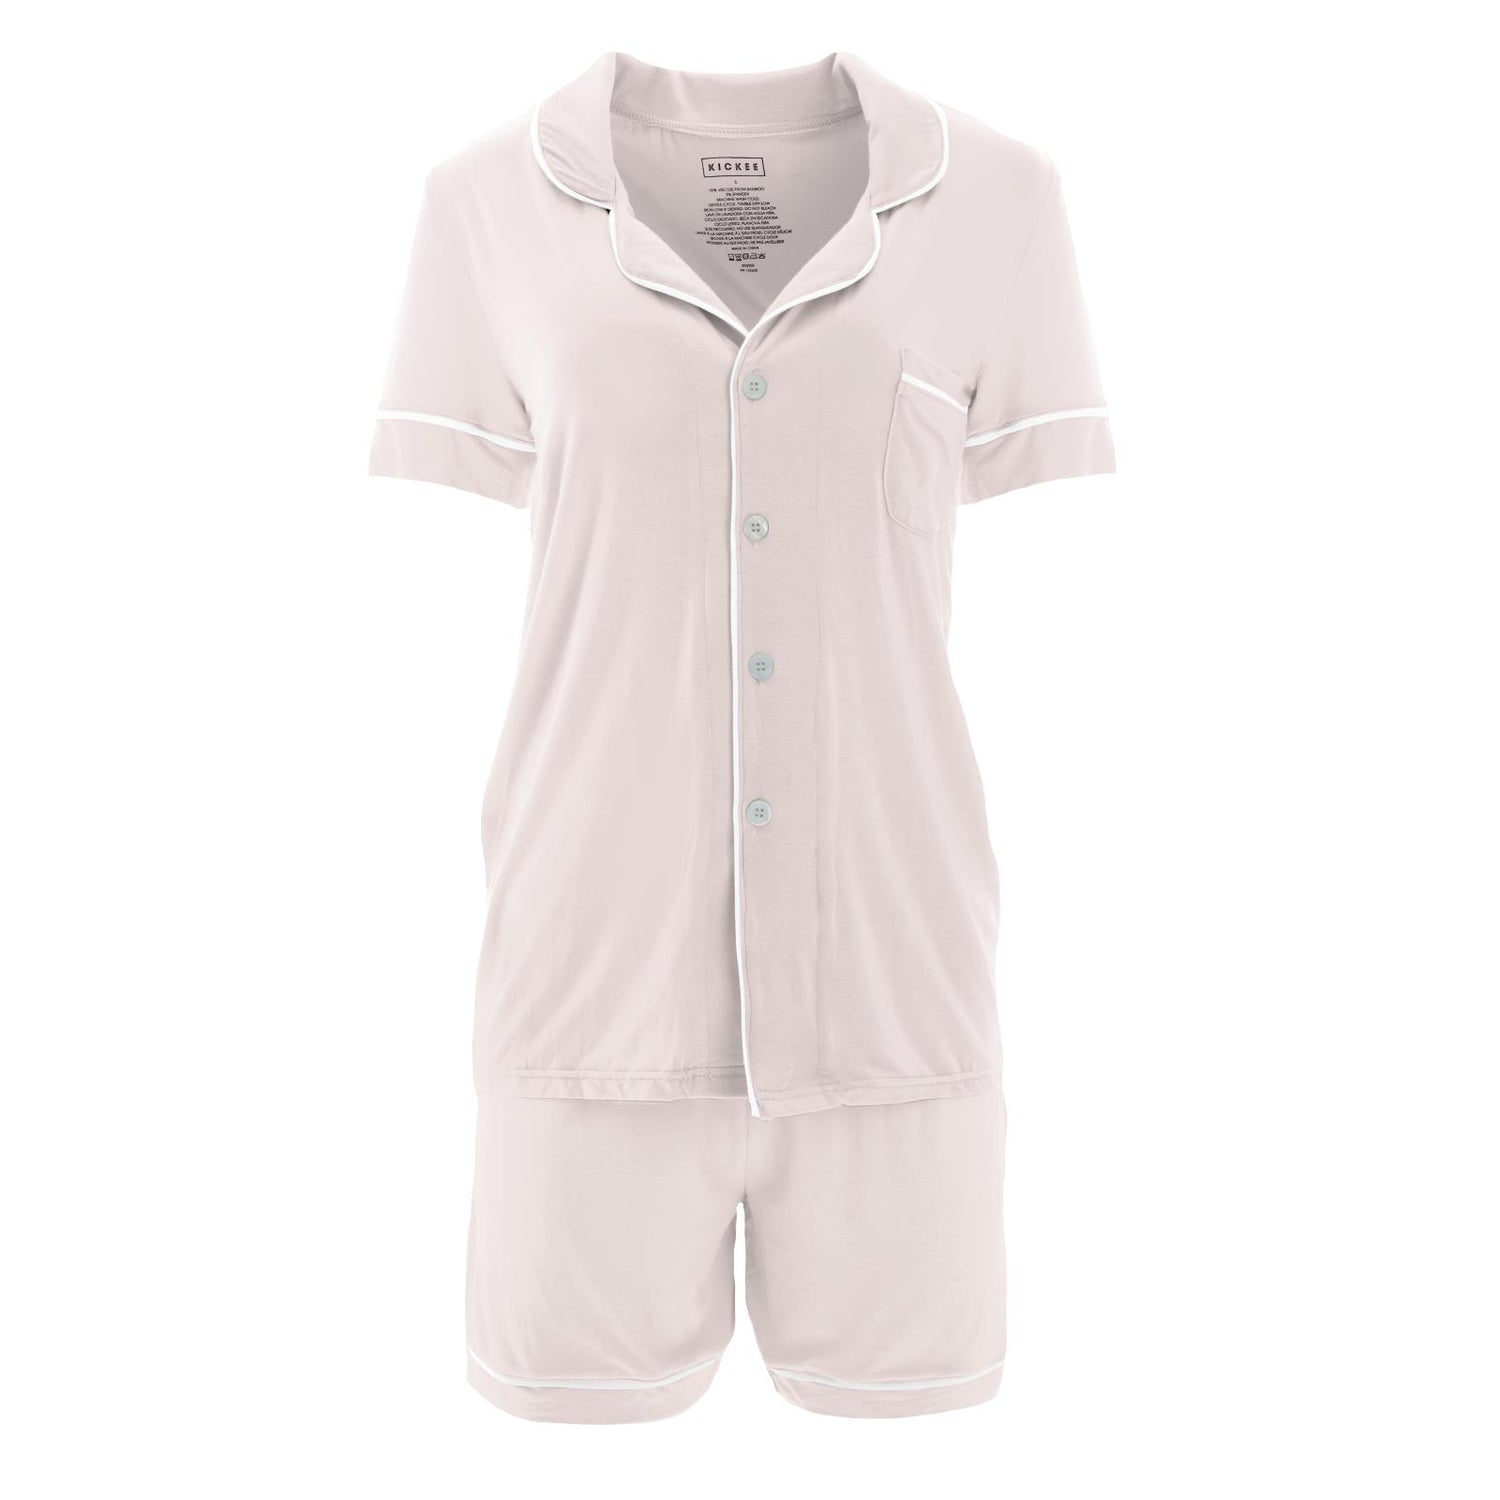 Women's Solid Short Sleeve Collared Pajama Set with Shorts in Macaroon with Natural